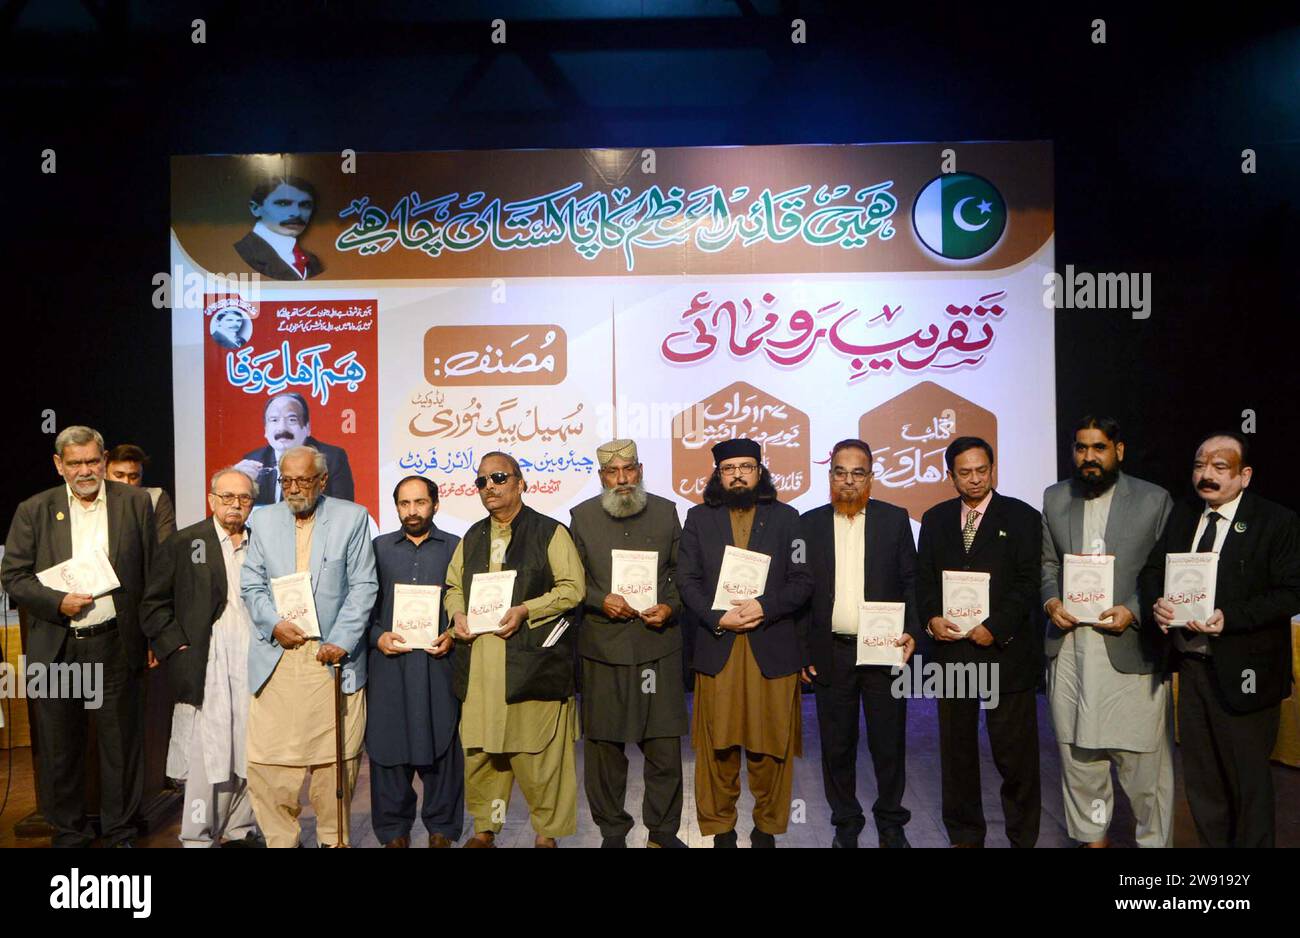 Advocate Sohail Beg Noori along with others in a group during the book unveiling ceremony of 'Hum Ahl-e-Wafa' in connection of the 147th birth anniversary of the founder of Pakistan, Quaid-e-Azam Muhammad Ali Jinnah, held at Art Council building in Karachi on Saturday, December 23, 2023. Stock Photo